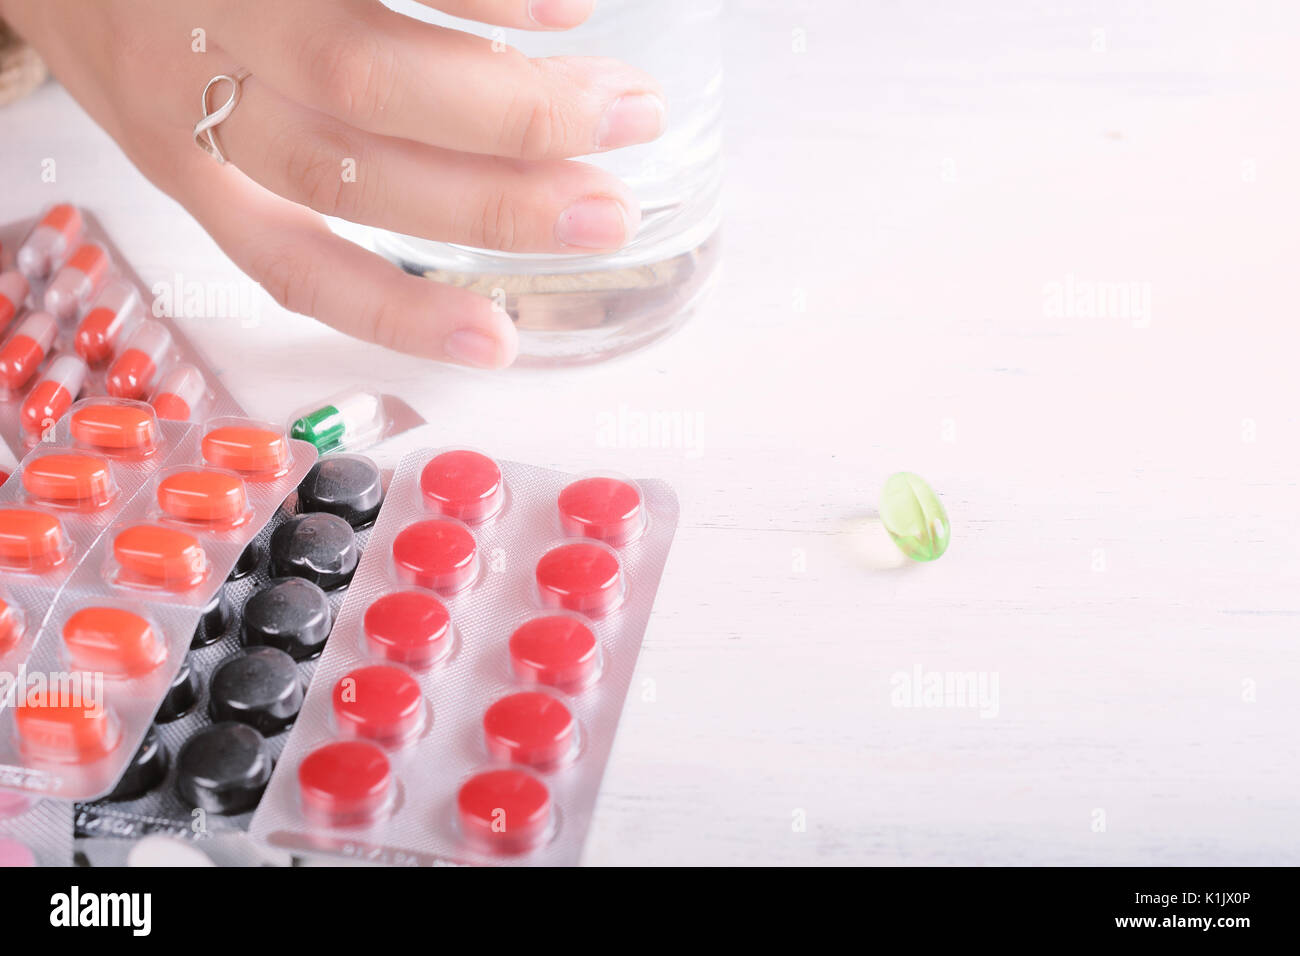 Close-up of woman hands with glass of water, pills and tablets. Healthcare concept. Stock Photo